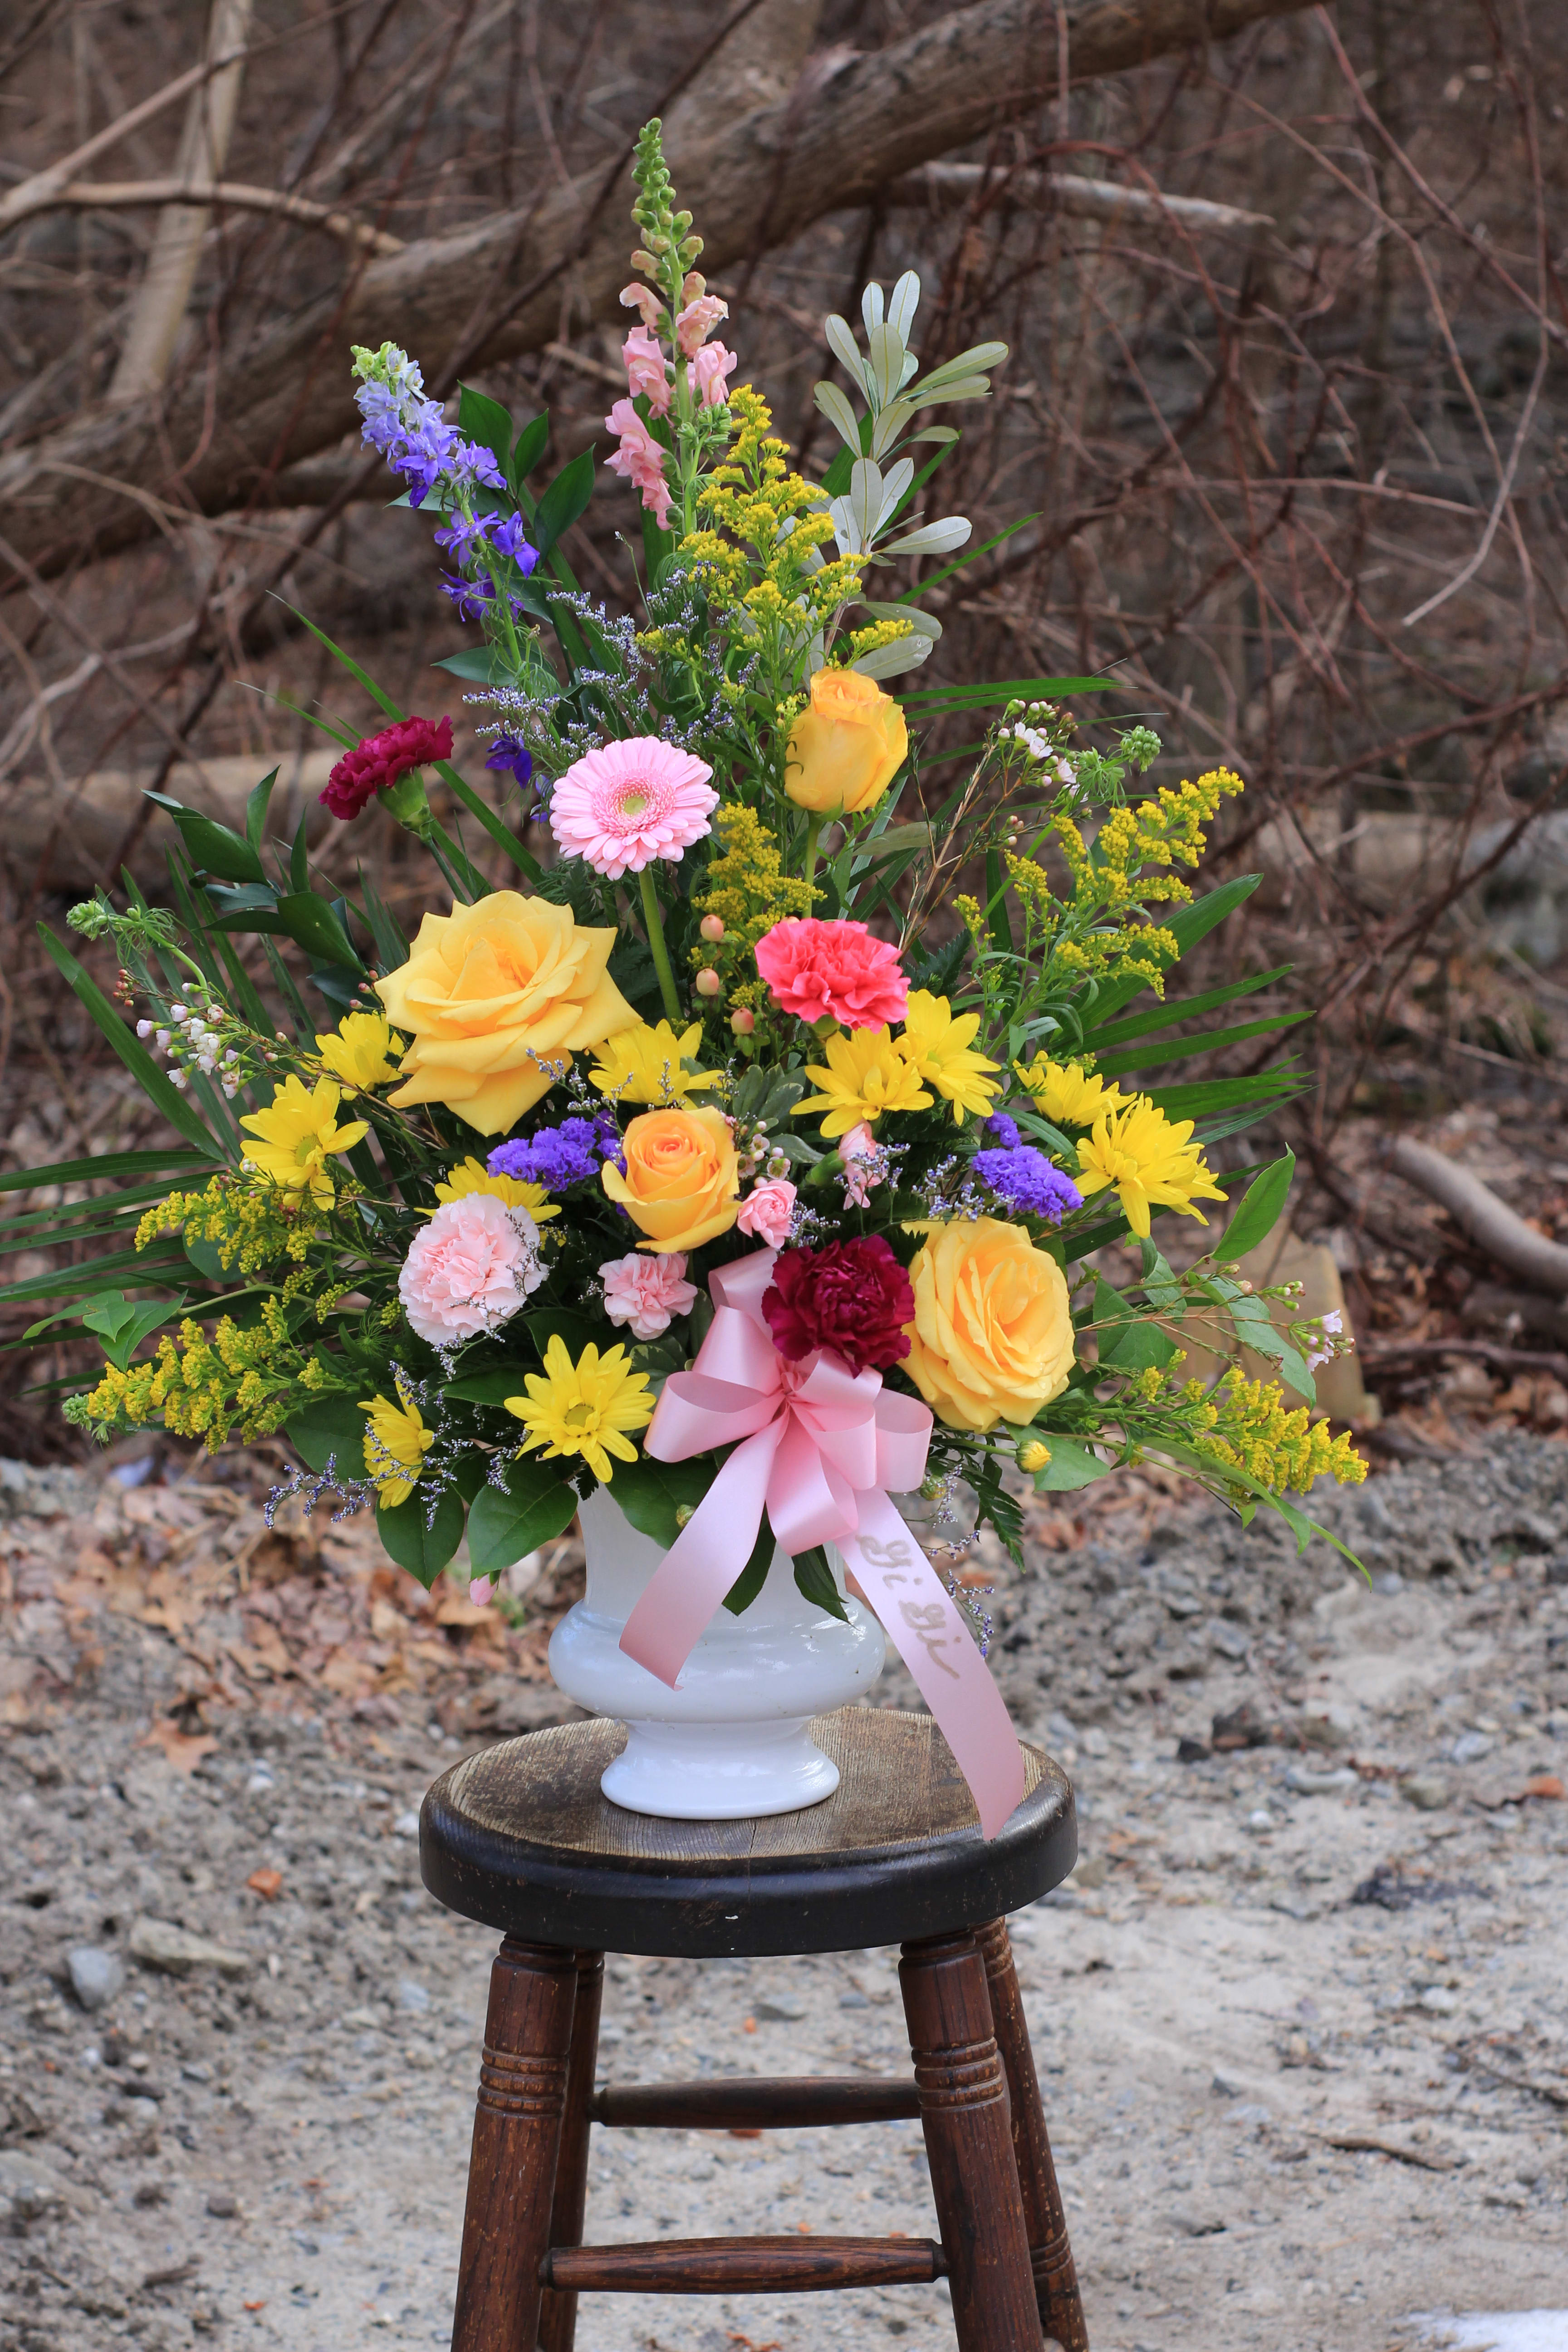 Graceful Garden Mache - A graceful arrangement to be placed in the funeral home or church. Designed with fresh roses, carnations, daisies, matsumoto asters, and other seasonally picked blossoms in bright yellows, pinks, and purples. Carefully arranged with wild garden flair. Compliments nicely with Graceful Garden Urn Wreath.